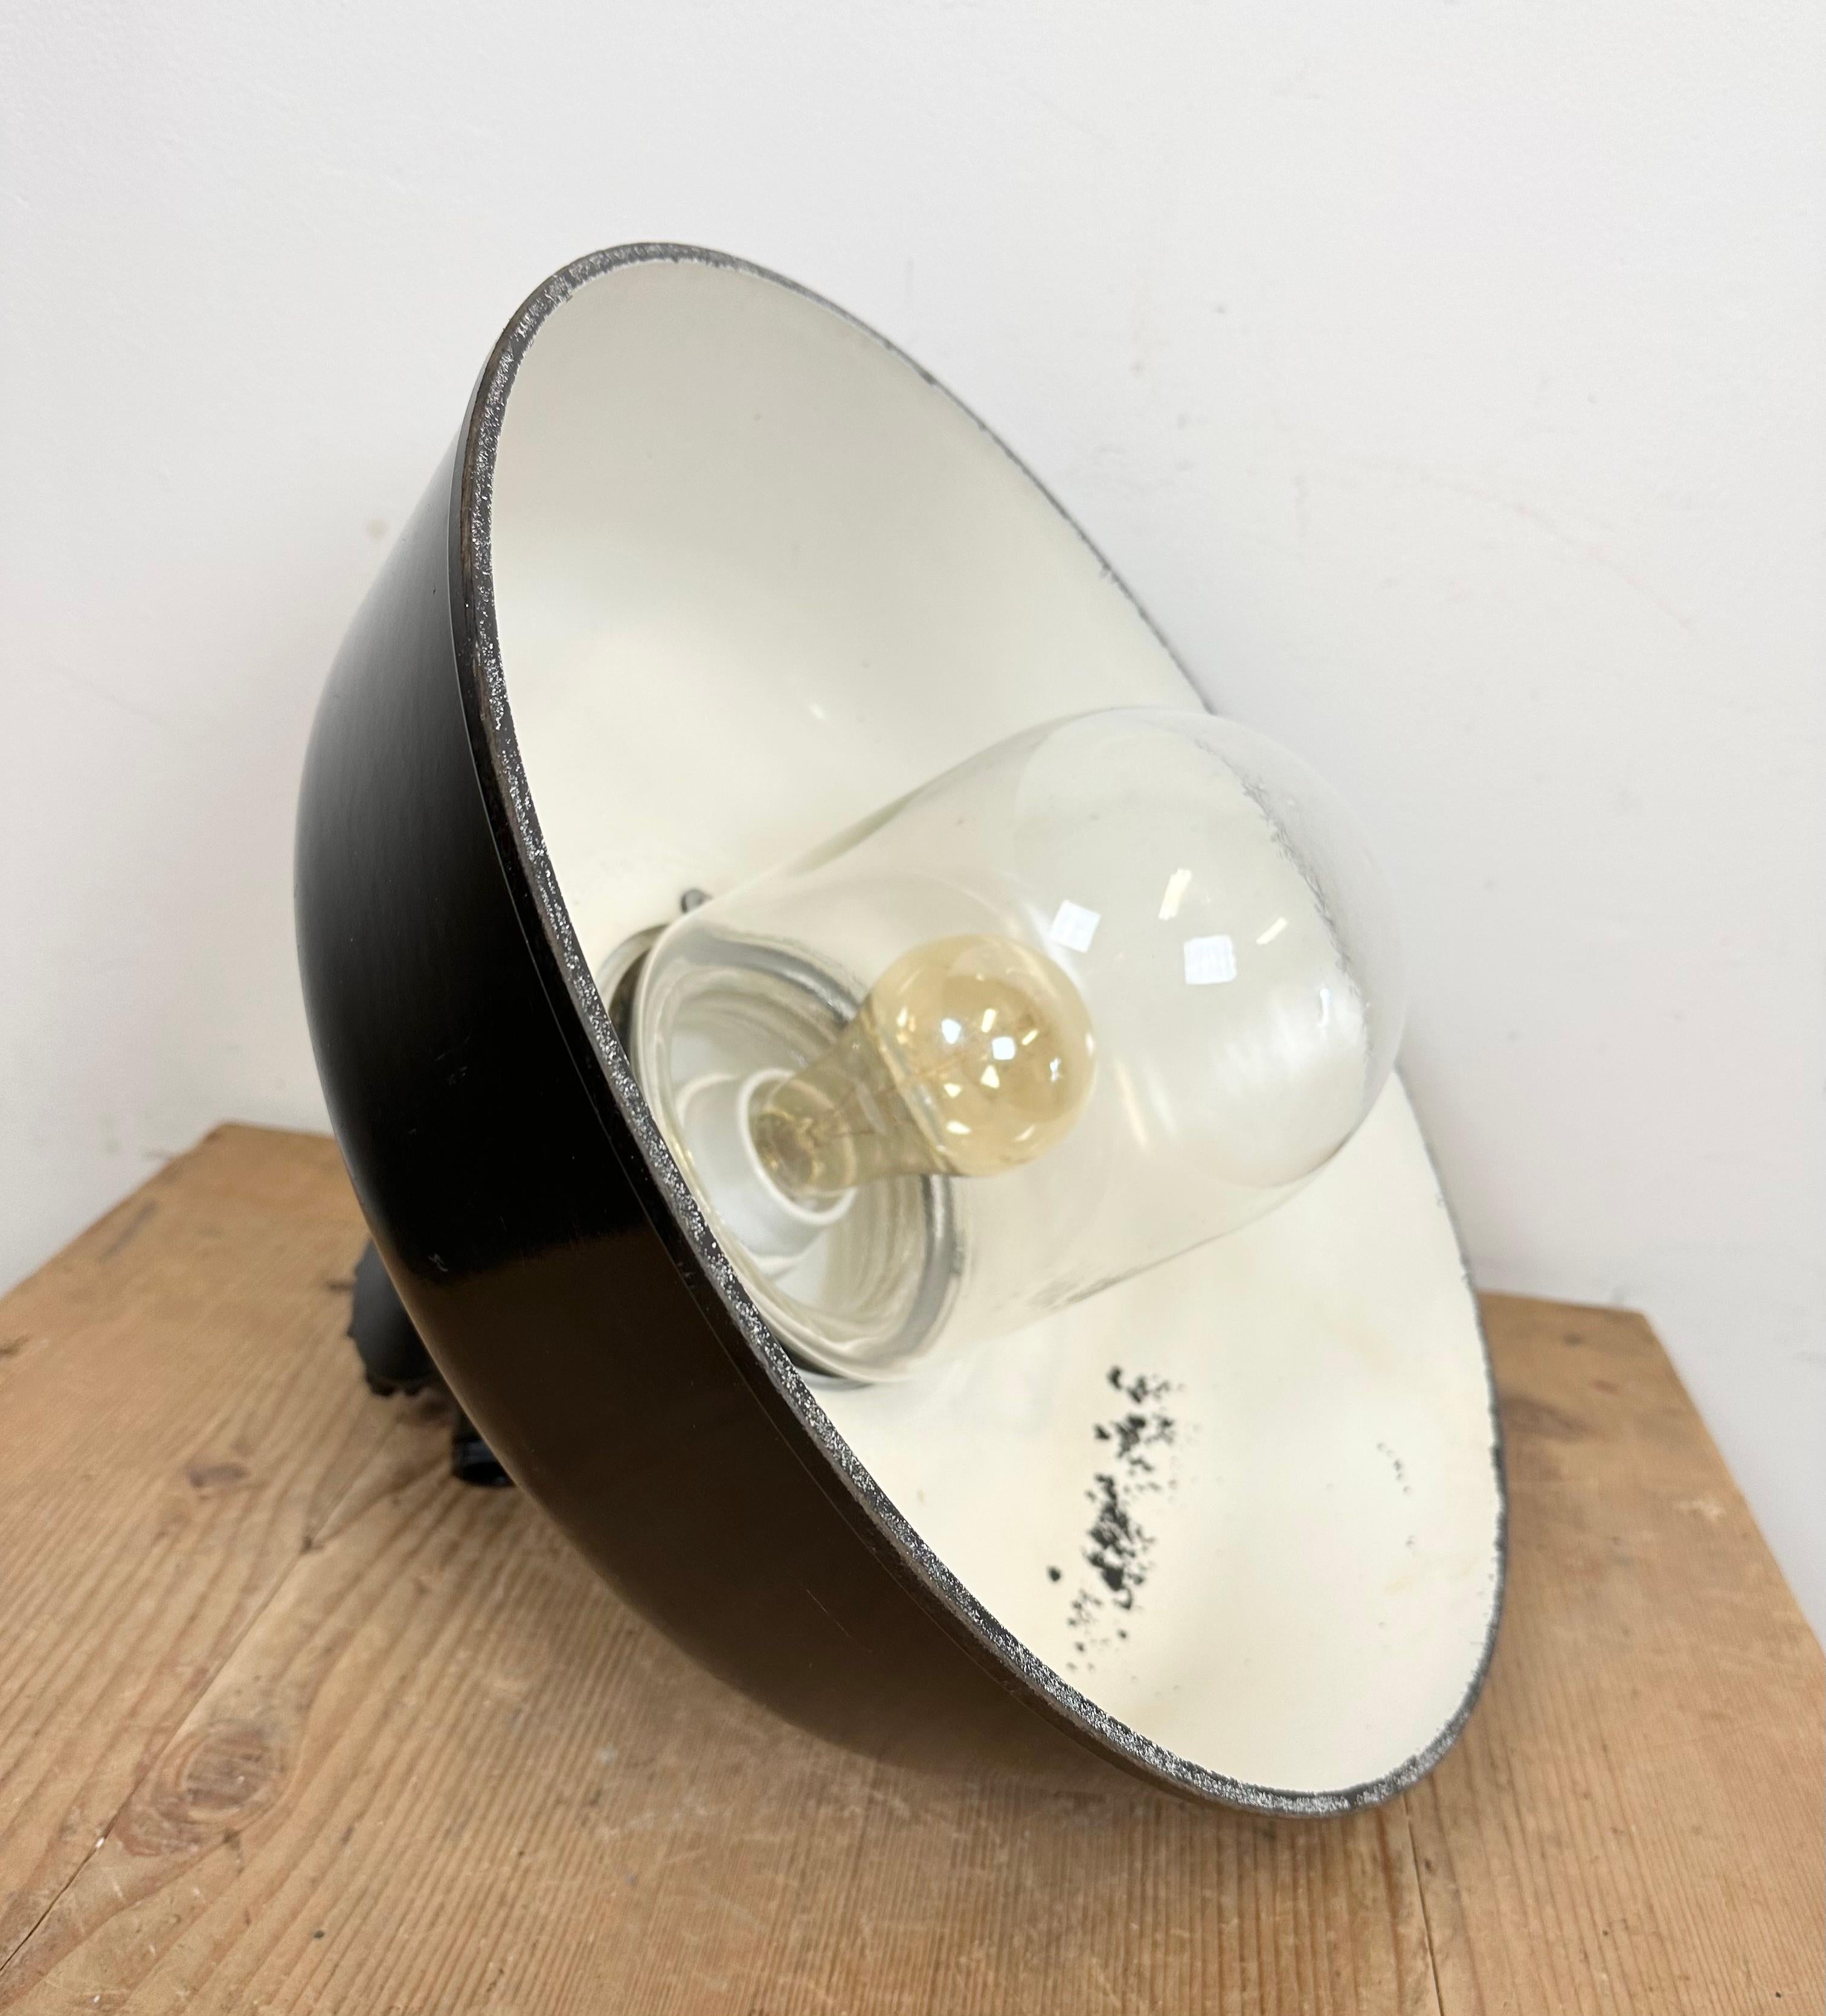 Industrial Black Enamel Lamp with Glass Cover, 1950s For Sale 8